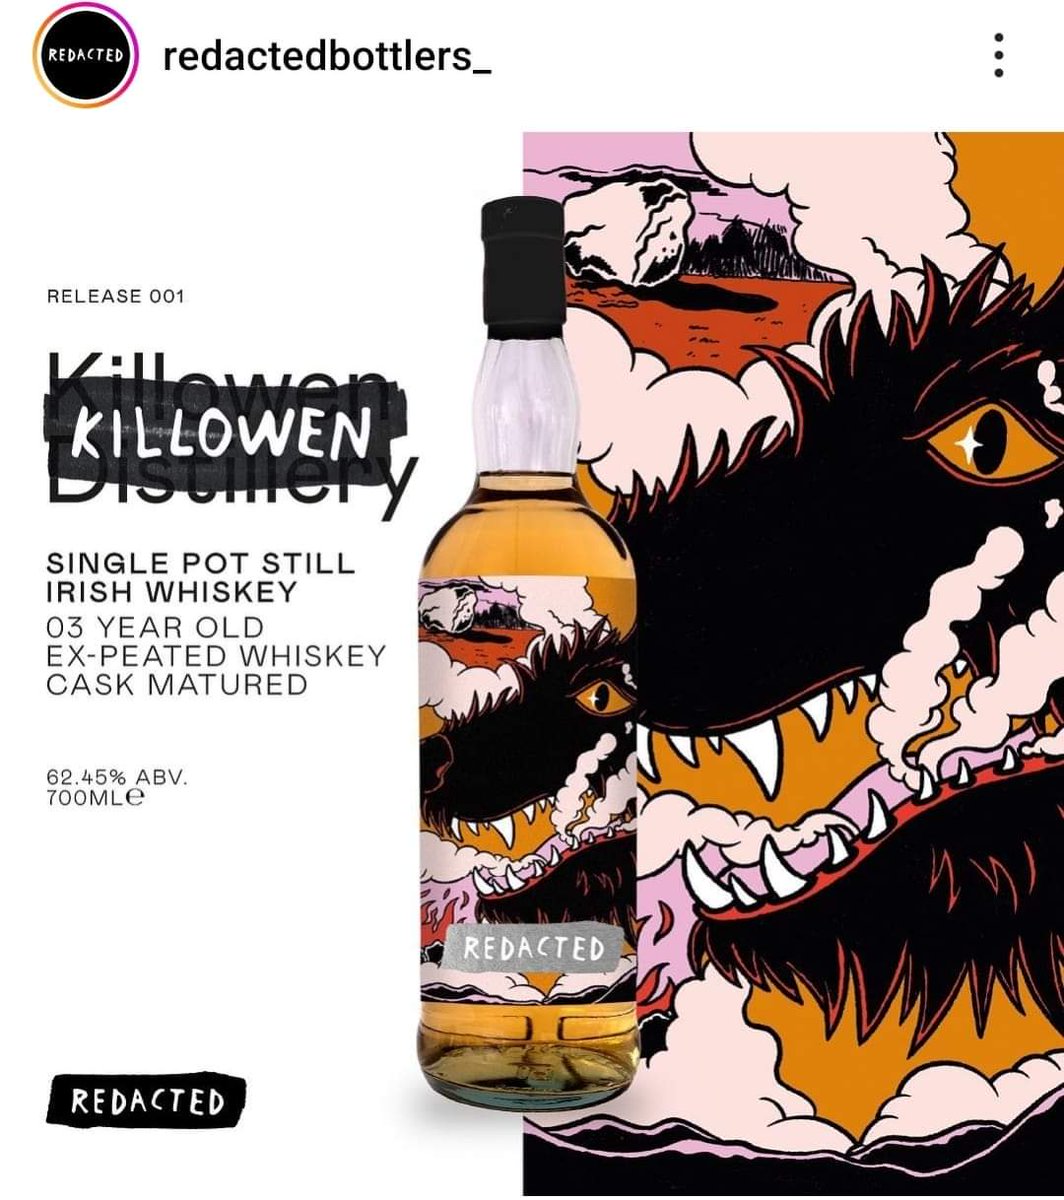 A very new and exciting independent bottler are coming out the gates swinging with an upcoming 700ml Killowen whiskey with some funky artwork! Subscribers to their mailing list will get early access when the bottle goes for sale very very soon!